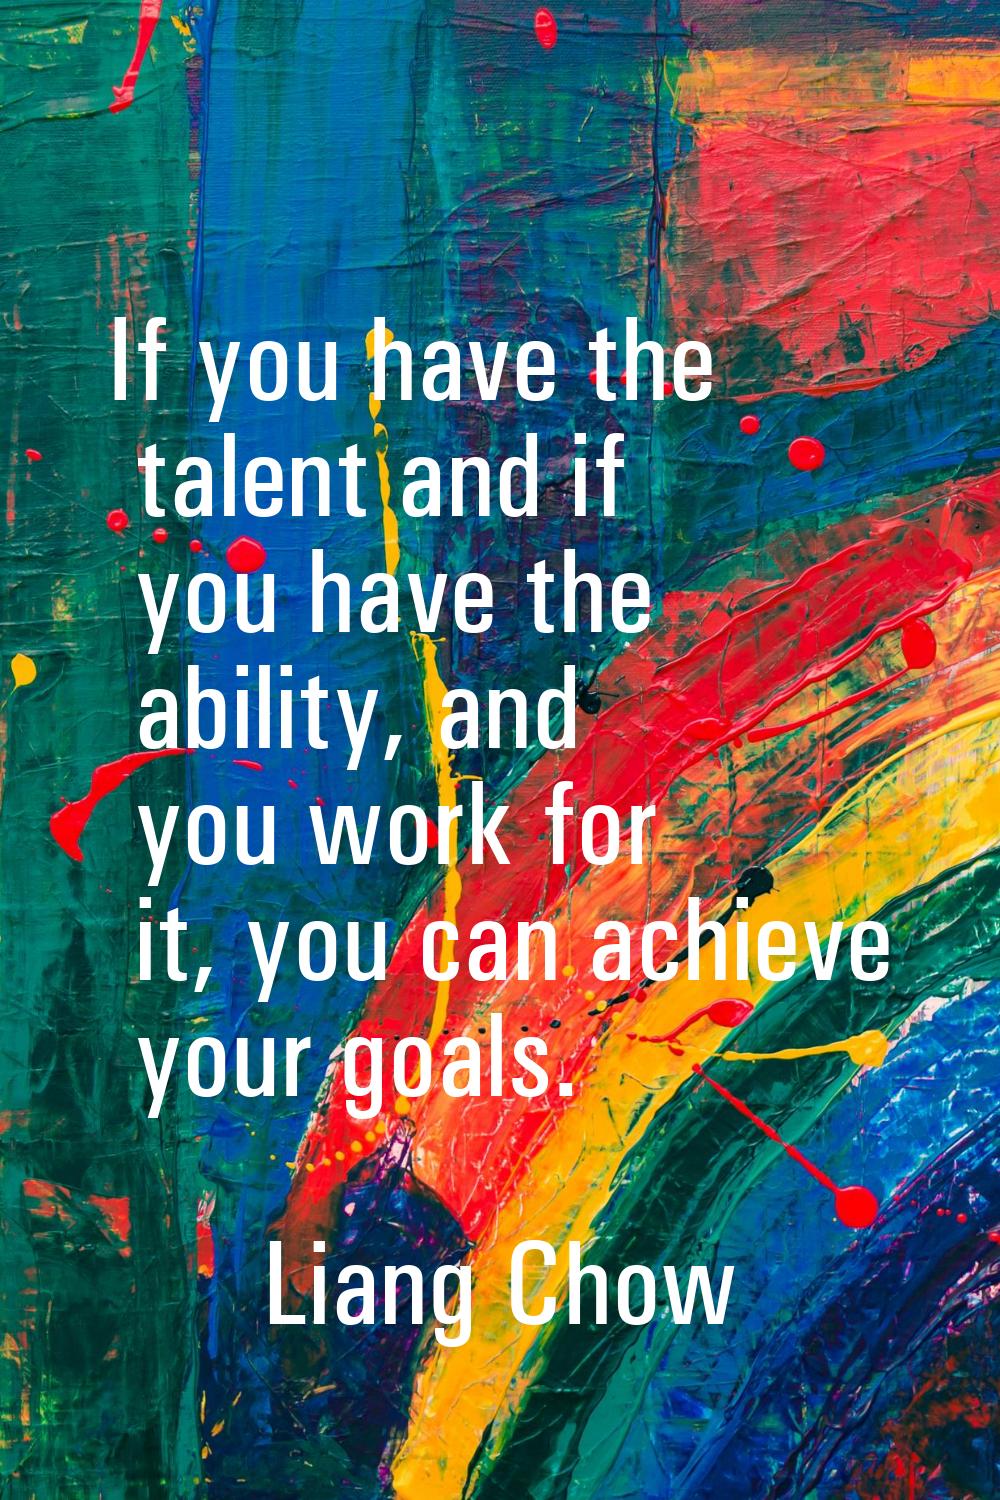 If you have the talent and if you have the ability, and you work for it, you can achieve your goals